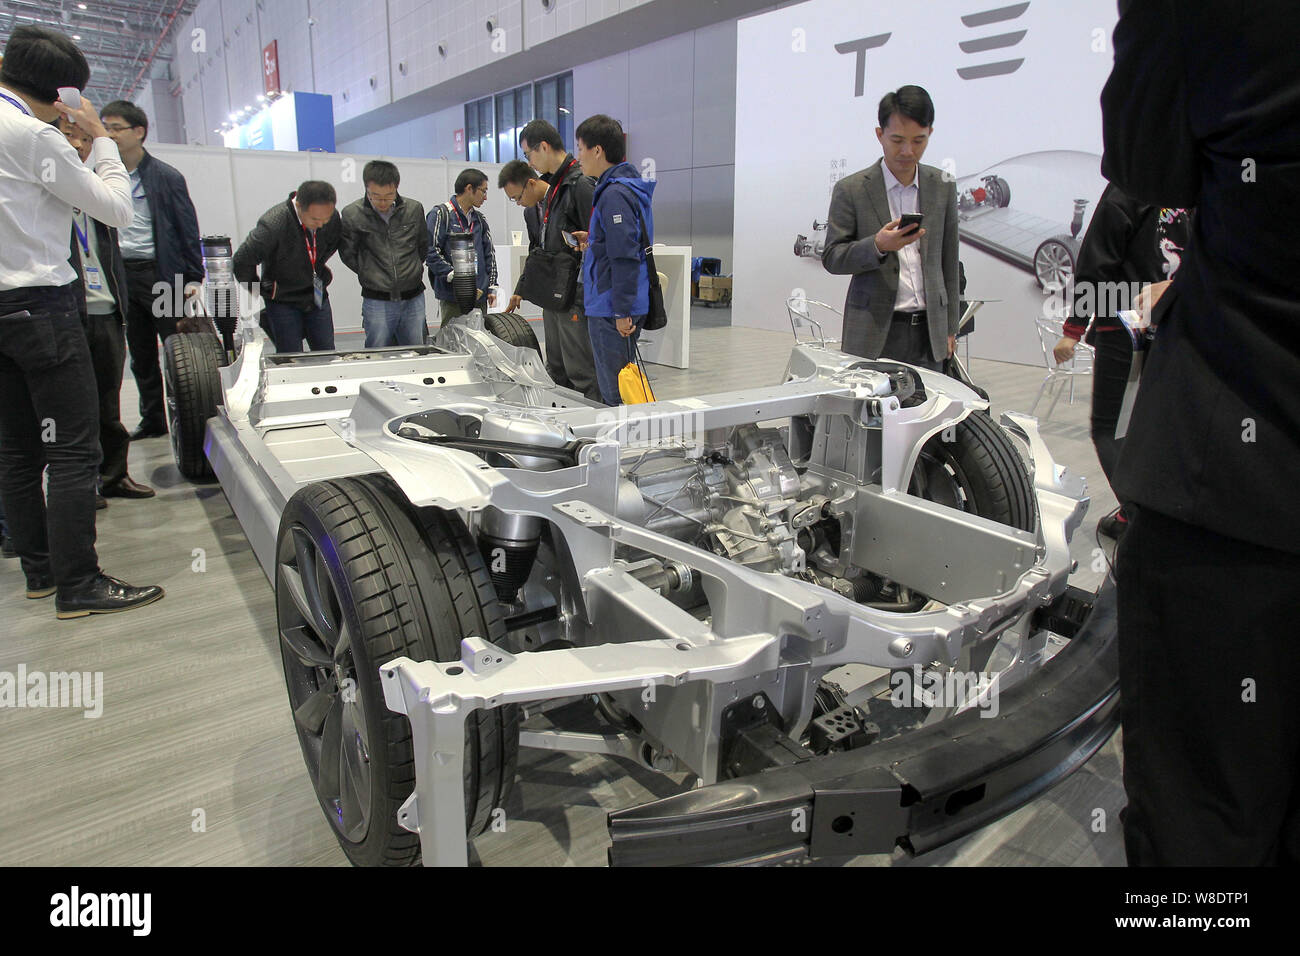 Visitors look at the chassis of a Tesla Model S electric car during the 17th China International Industry Fair in Shanghai, China, 3 November 2015. Stock Photo